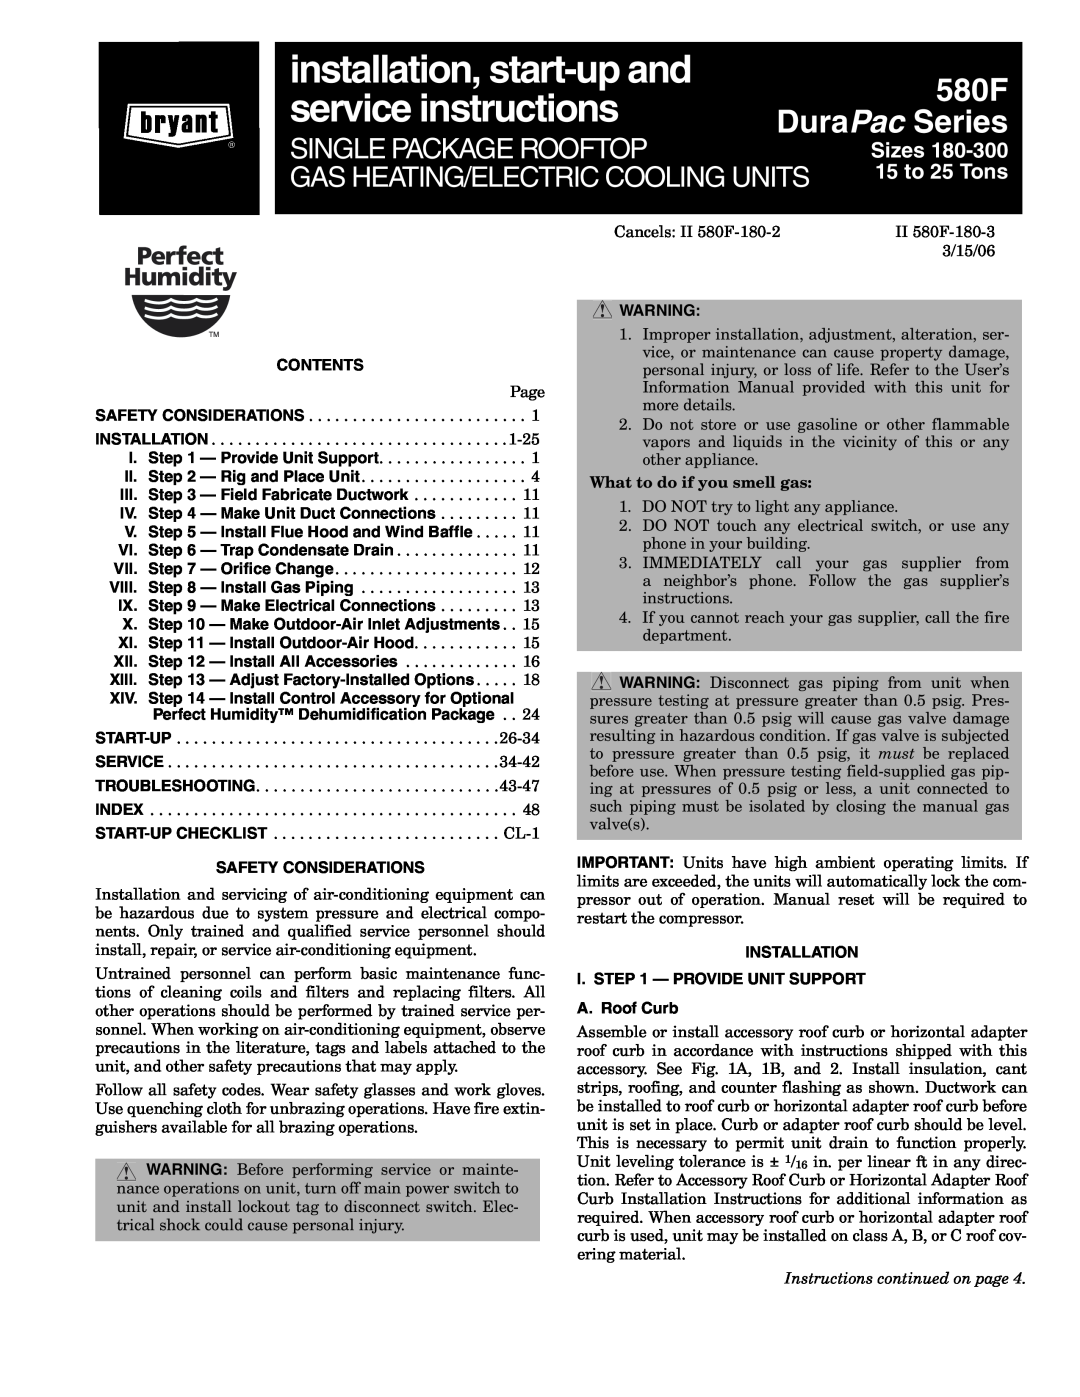 Bryant 580F operation manual Contents, Safety Considerations, Installation I. - Provide Unit Support, A. Roof Curb 